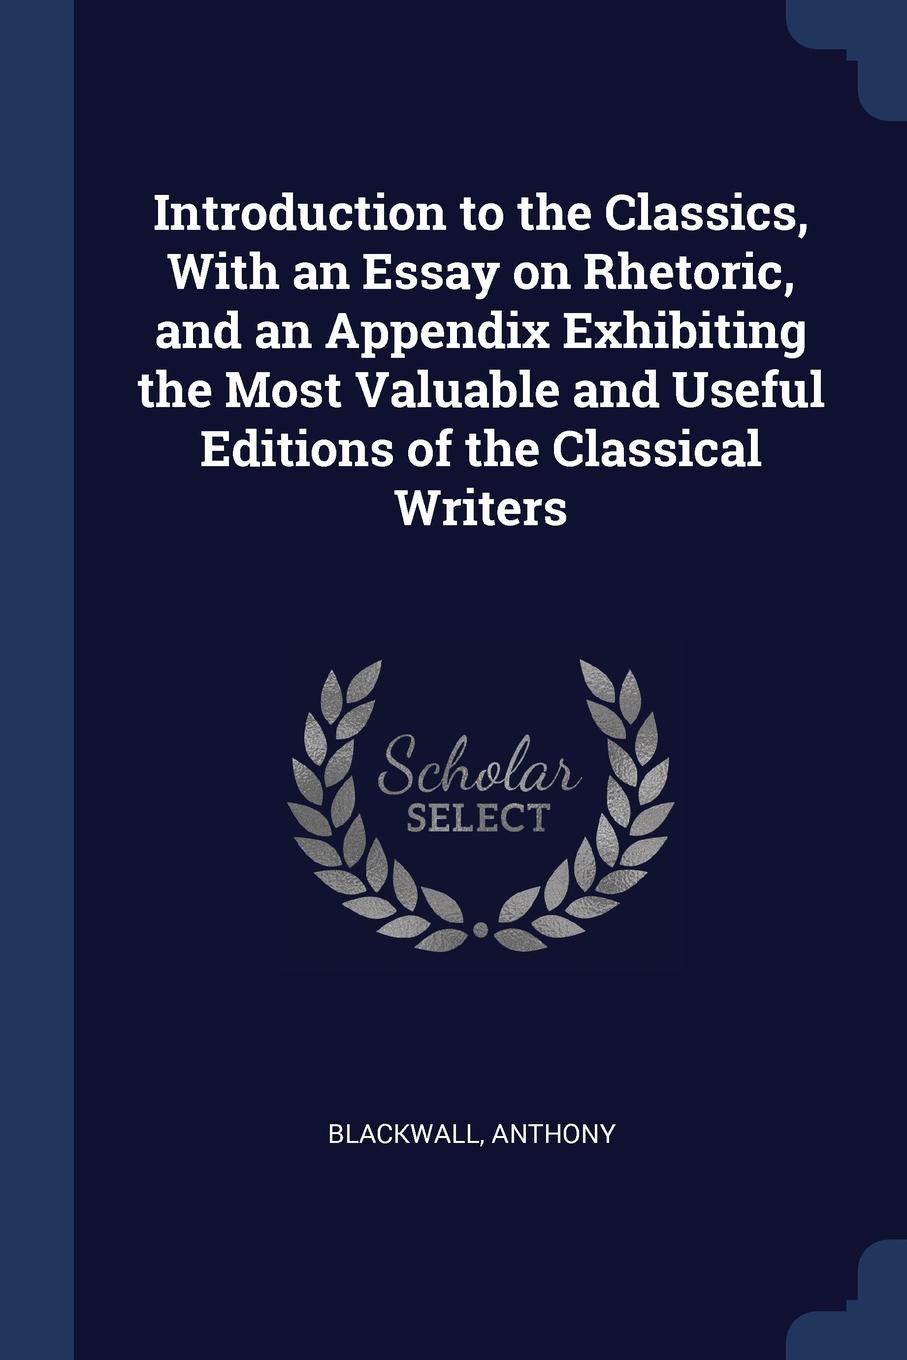 Introduction to the Classics, With an Essay on Rhetoric, and an Appendix Exhibiting the Most Valuable and Useful Editions of the Classical Writers